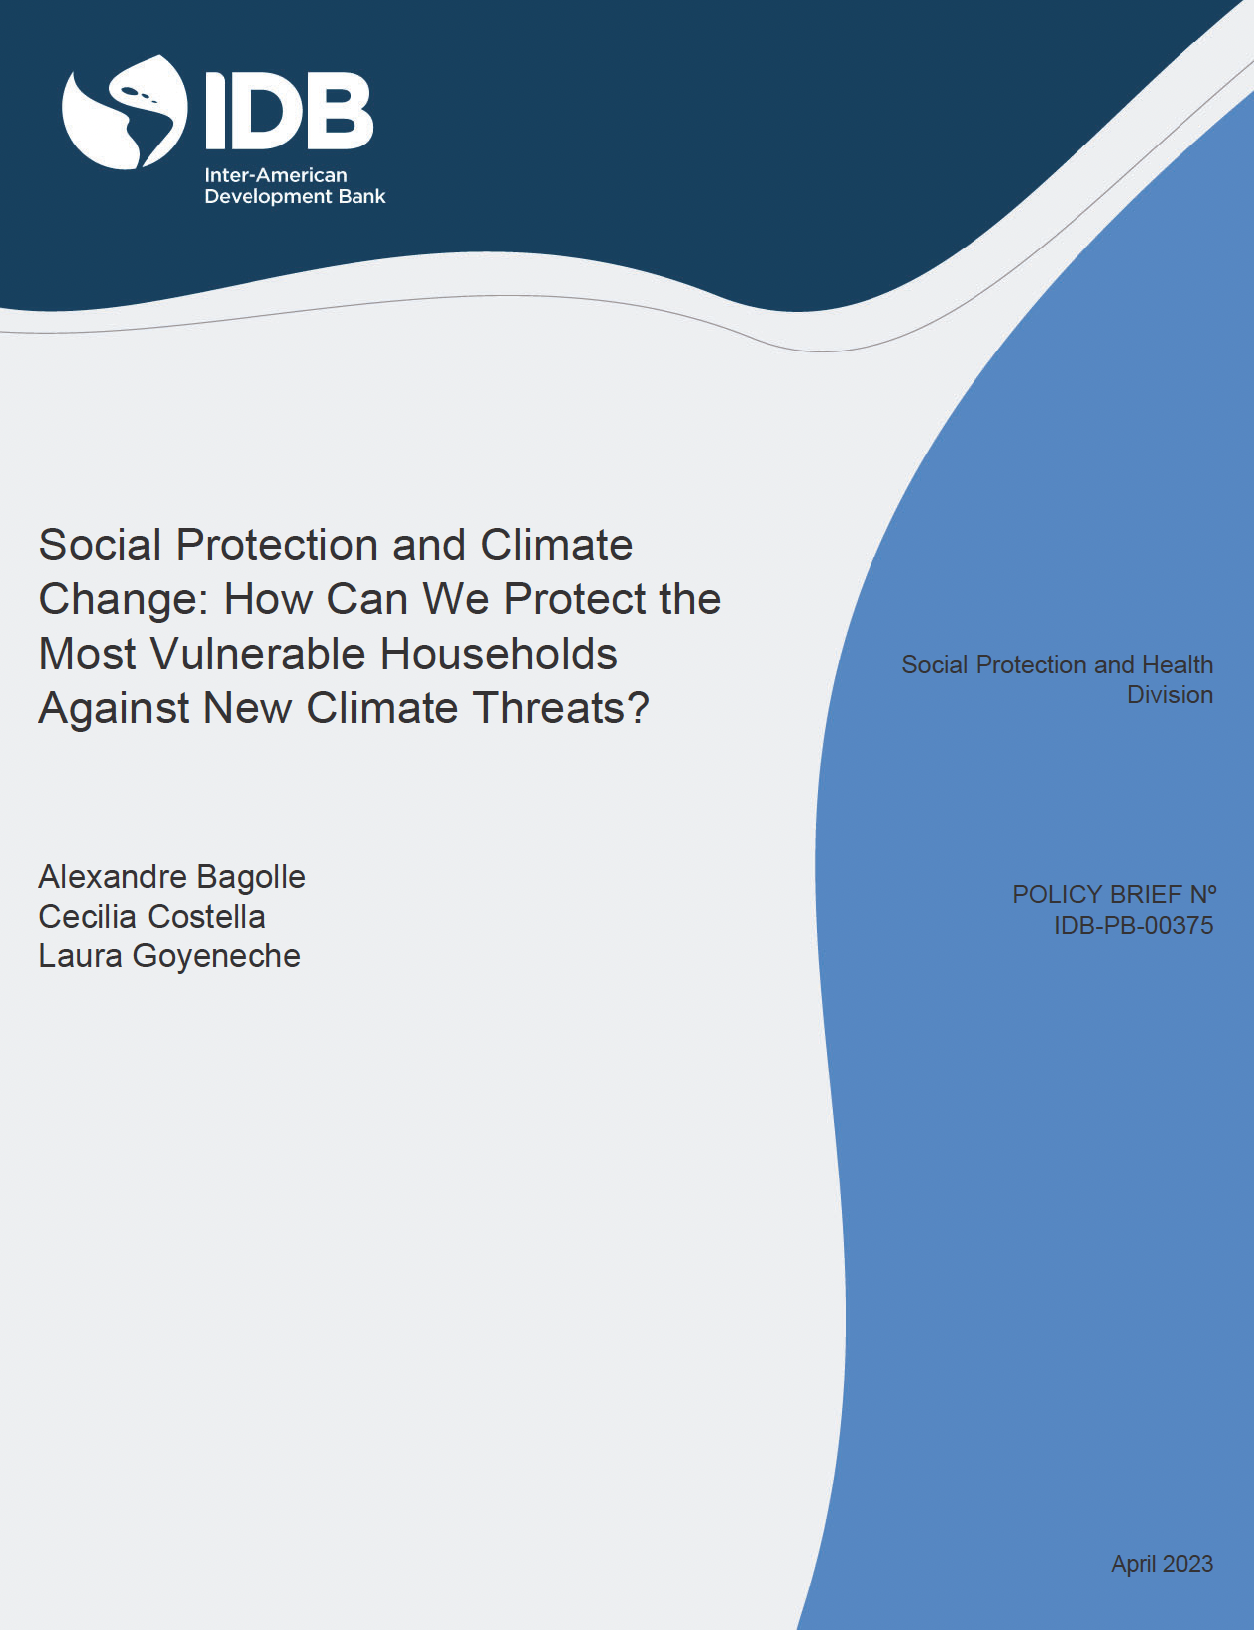 Social Protection and Climate Change: How Can We Protect the Most Vulnerable Households Against New Climate Threats?